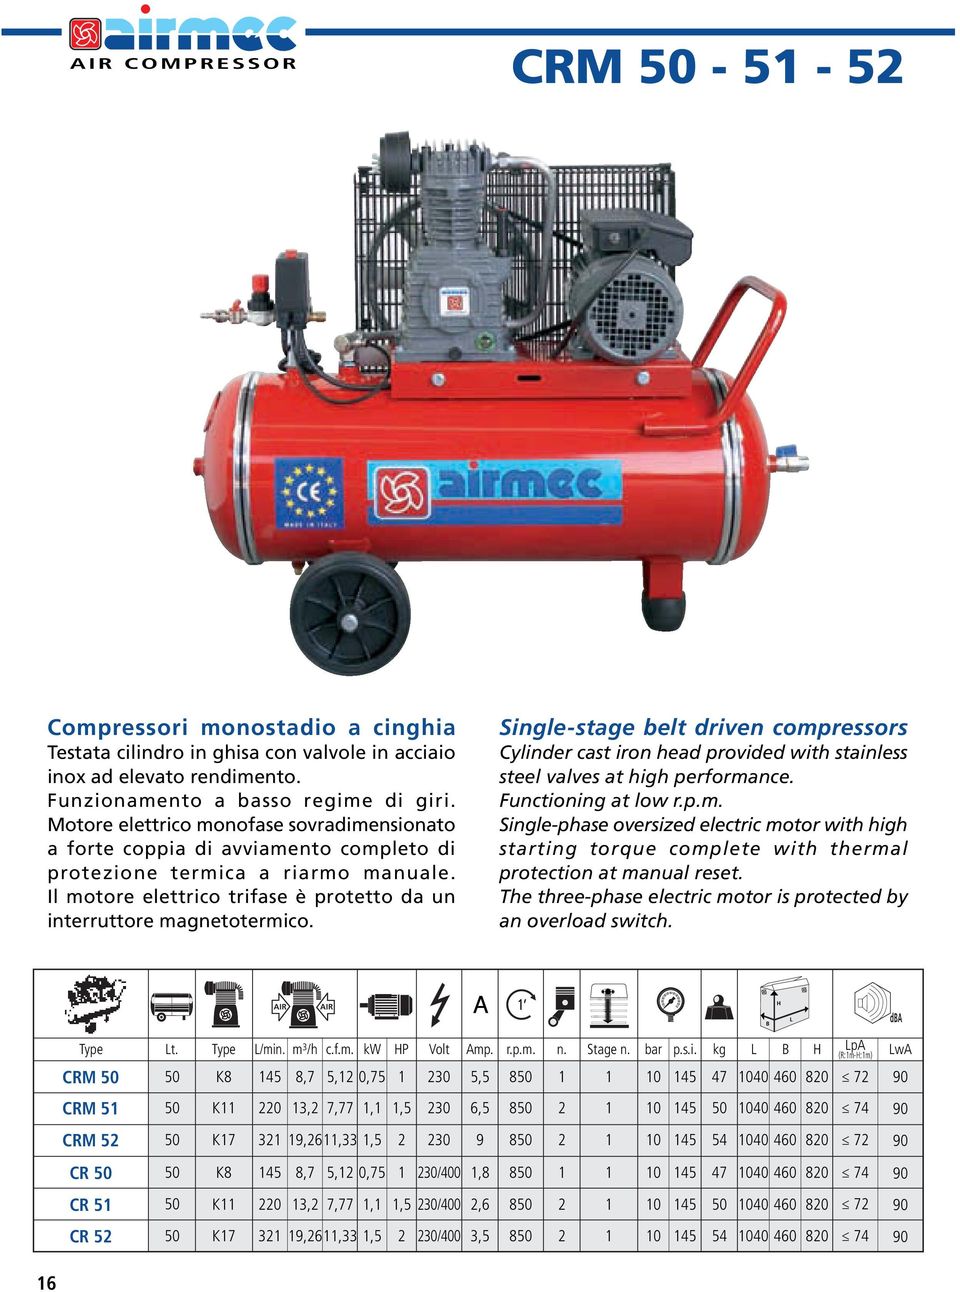 Single-stage belt driven compressors Cylinder cast iron head provided with stainless steel valves at high performance. Functioning at low r.p.m. Single-phase oversized electric motor with high starting torque complete with thermal protection at manual reset.